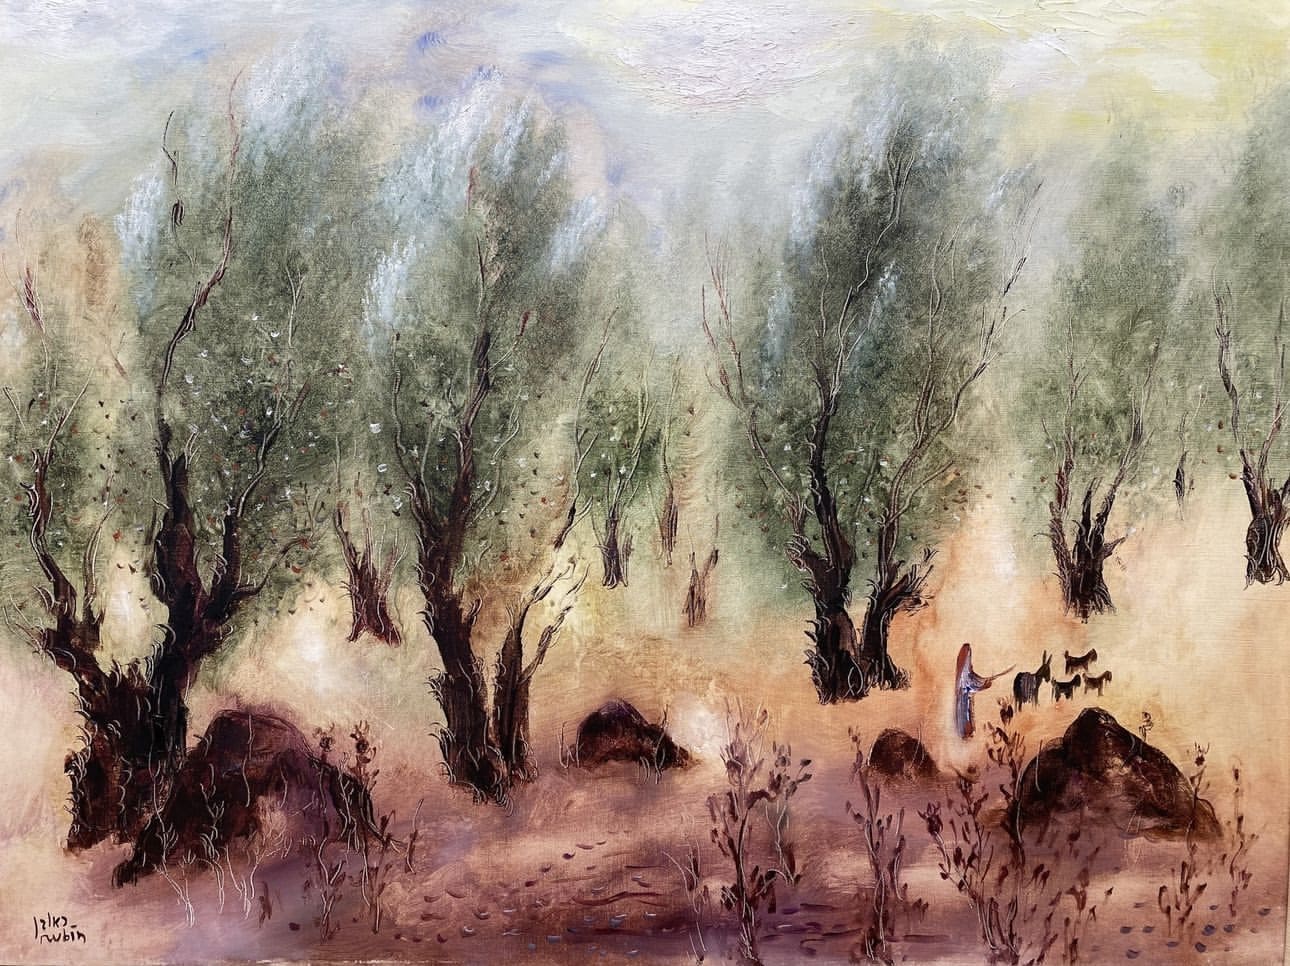 “Early Morning” by Reuven Rubin